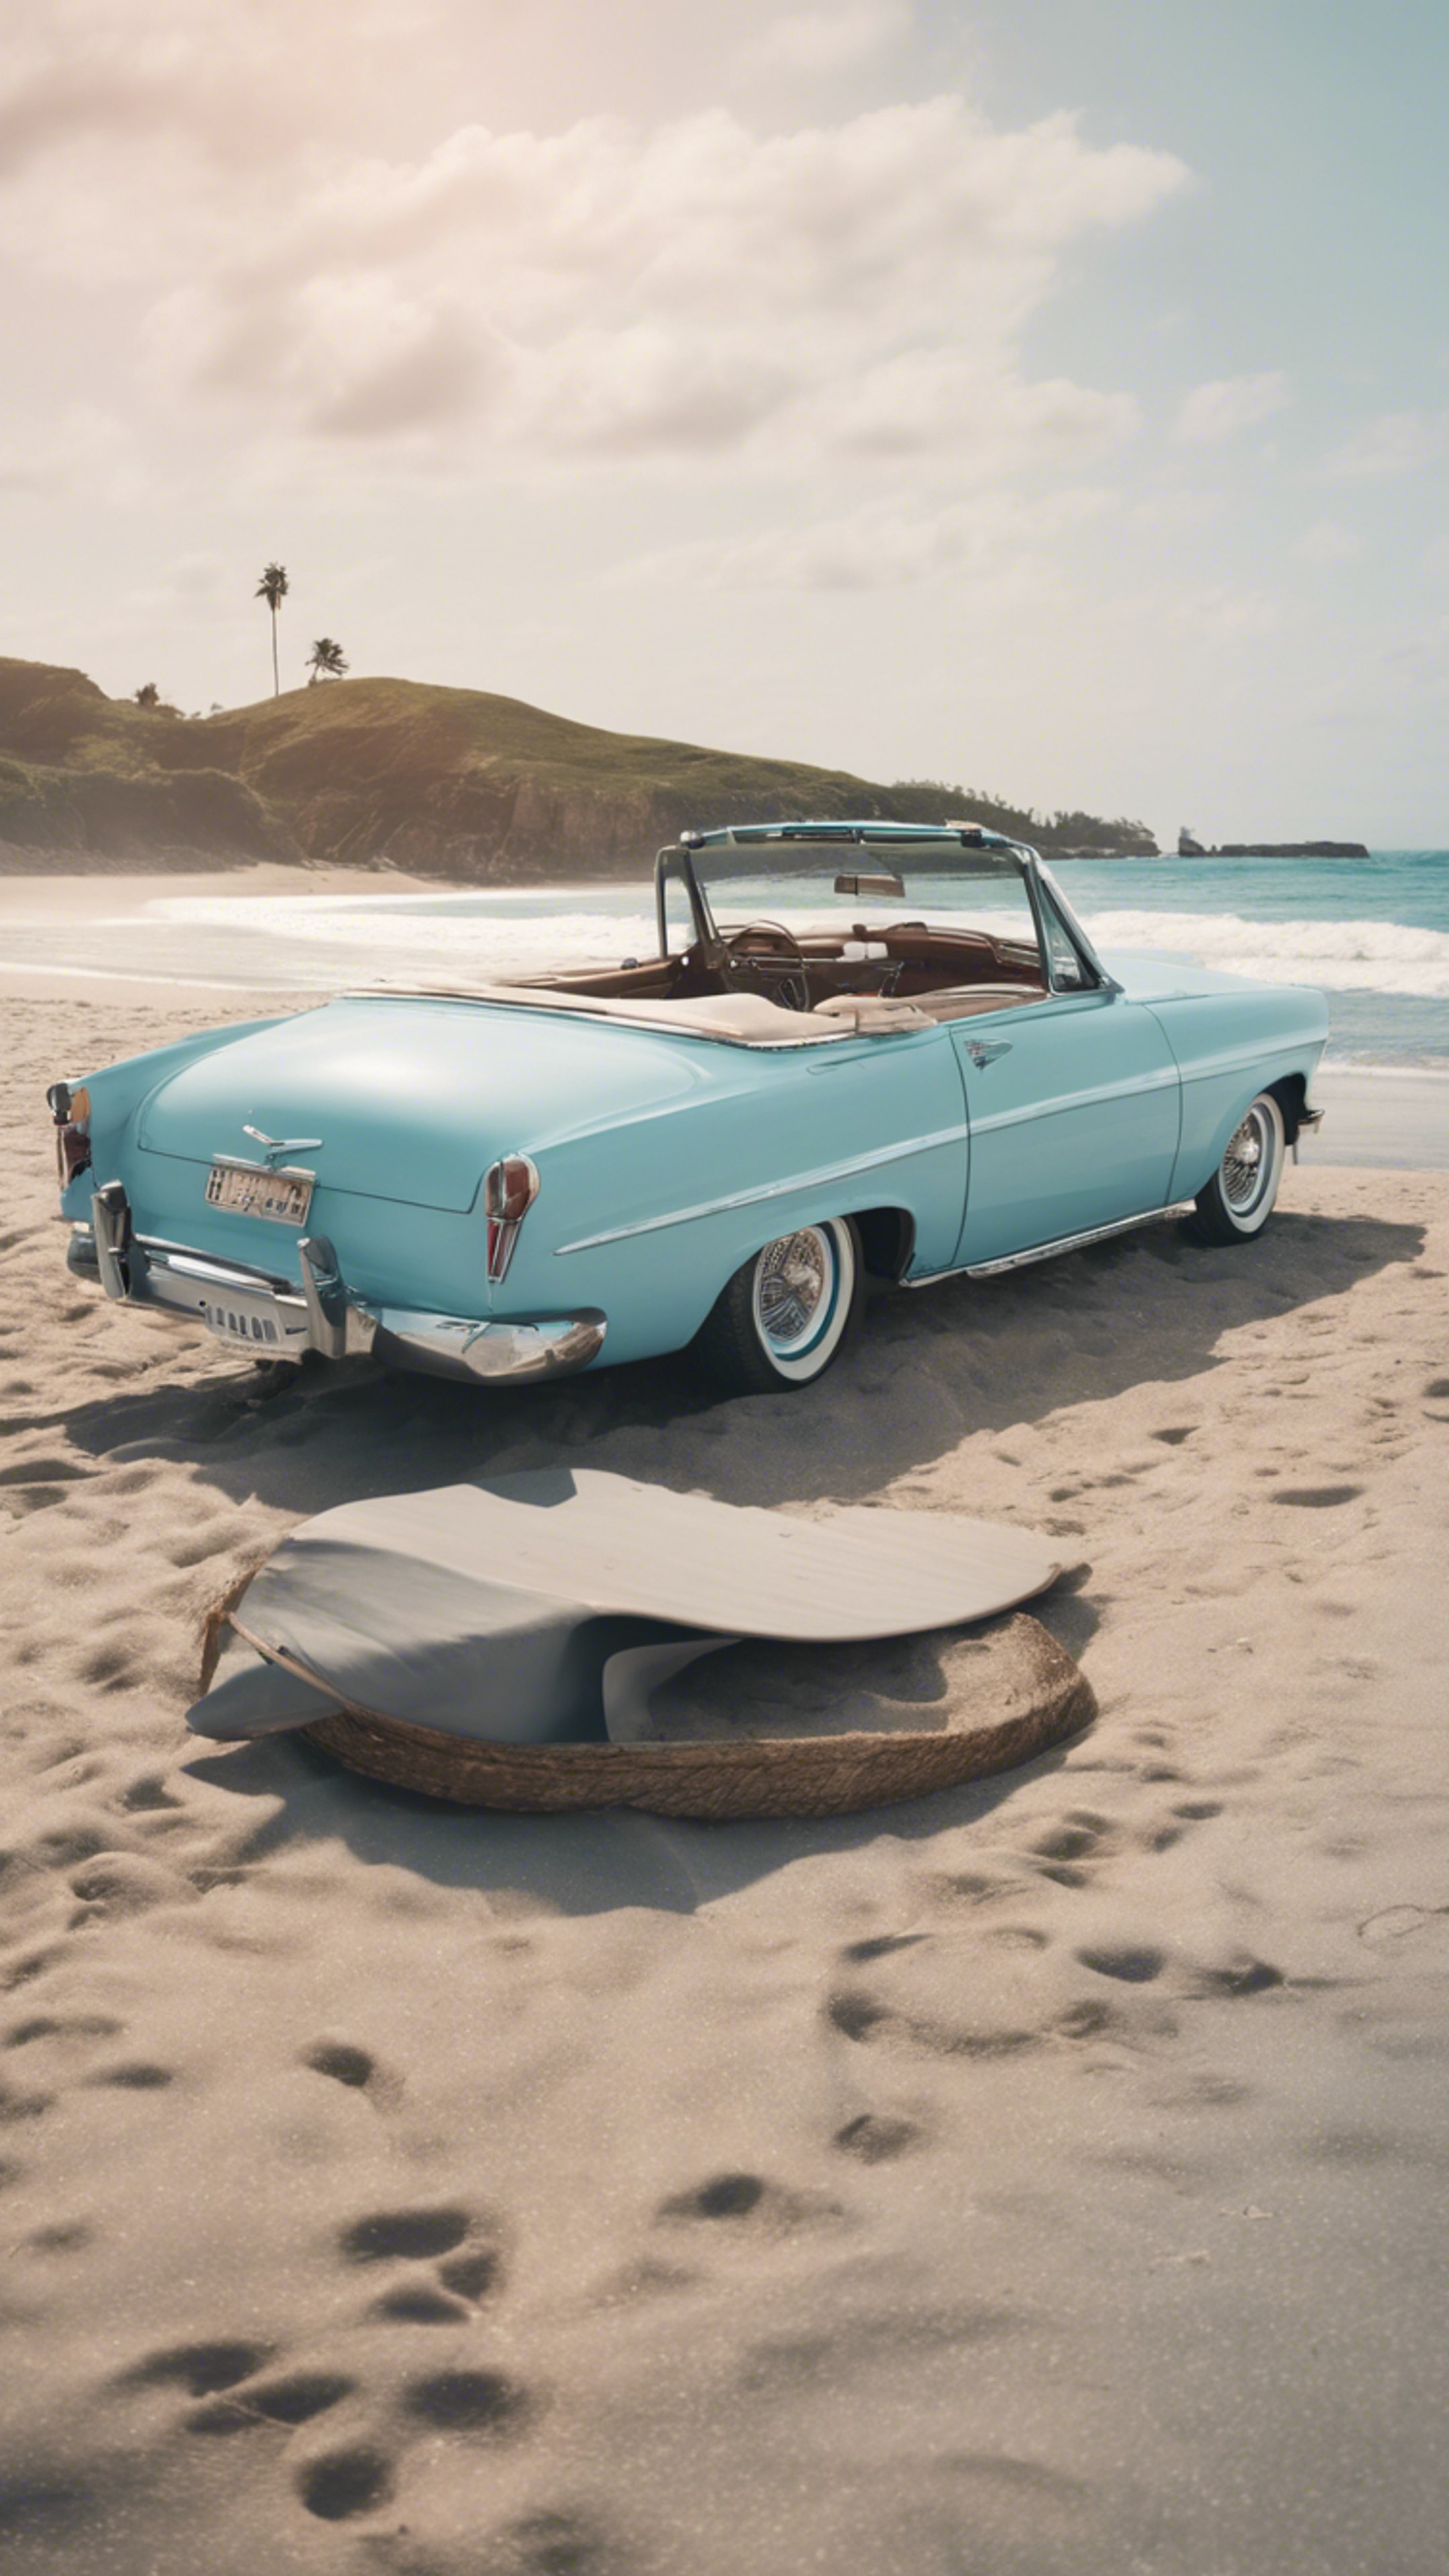 A vintage pastel blue convertible parked by a beach with surfboards leaning against it. Wallpaper[b081d9fd70654569bba1]